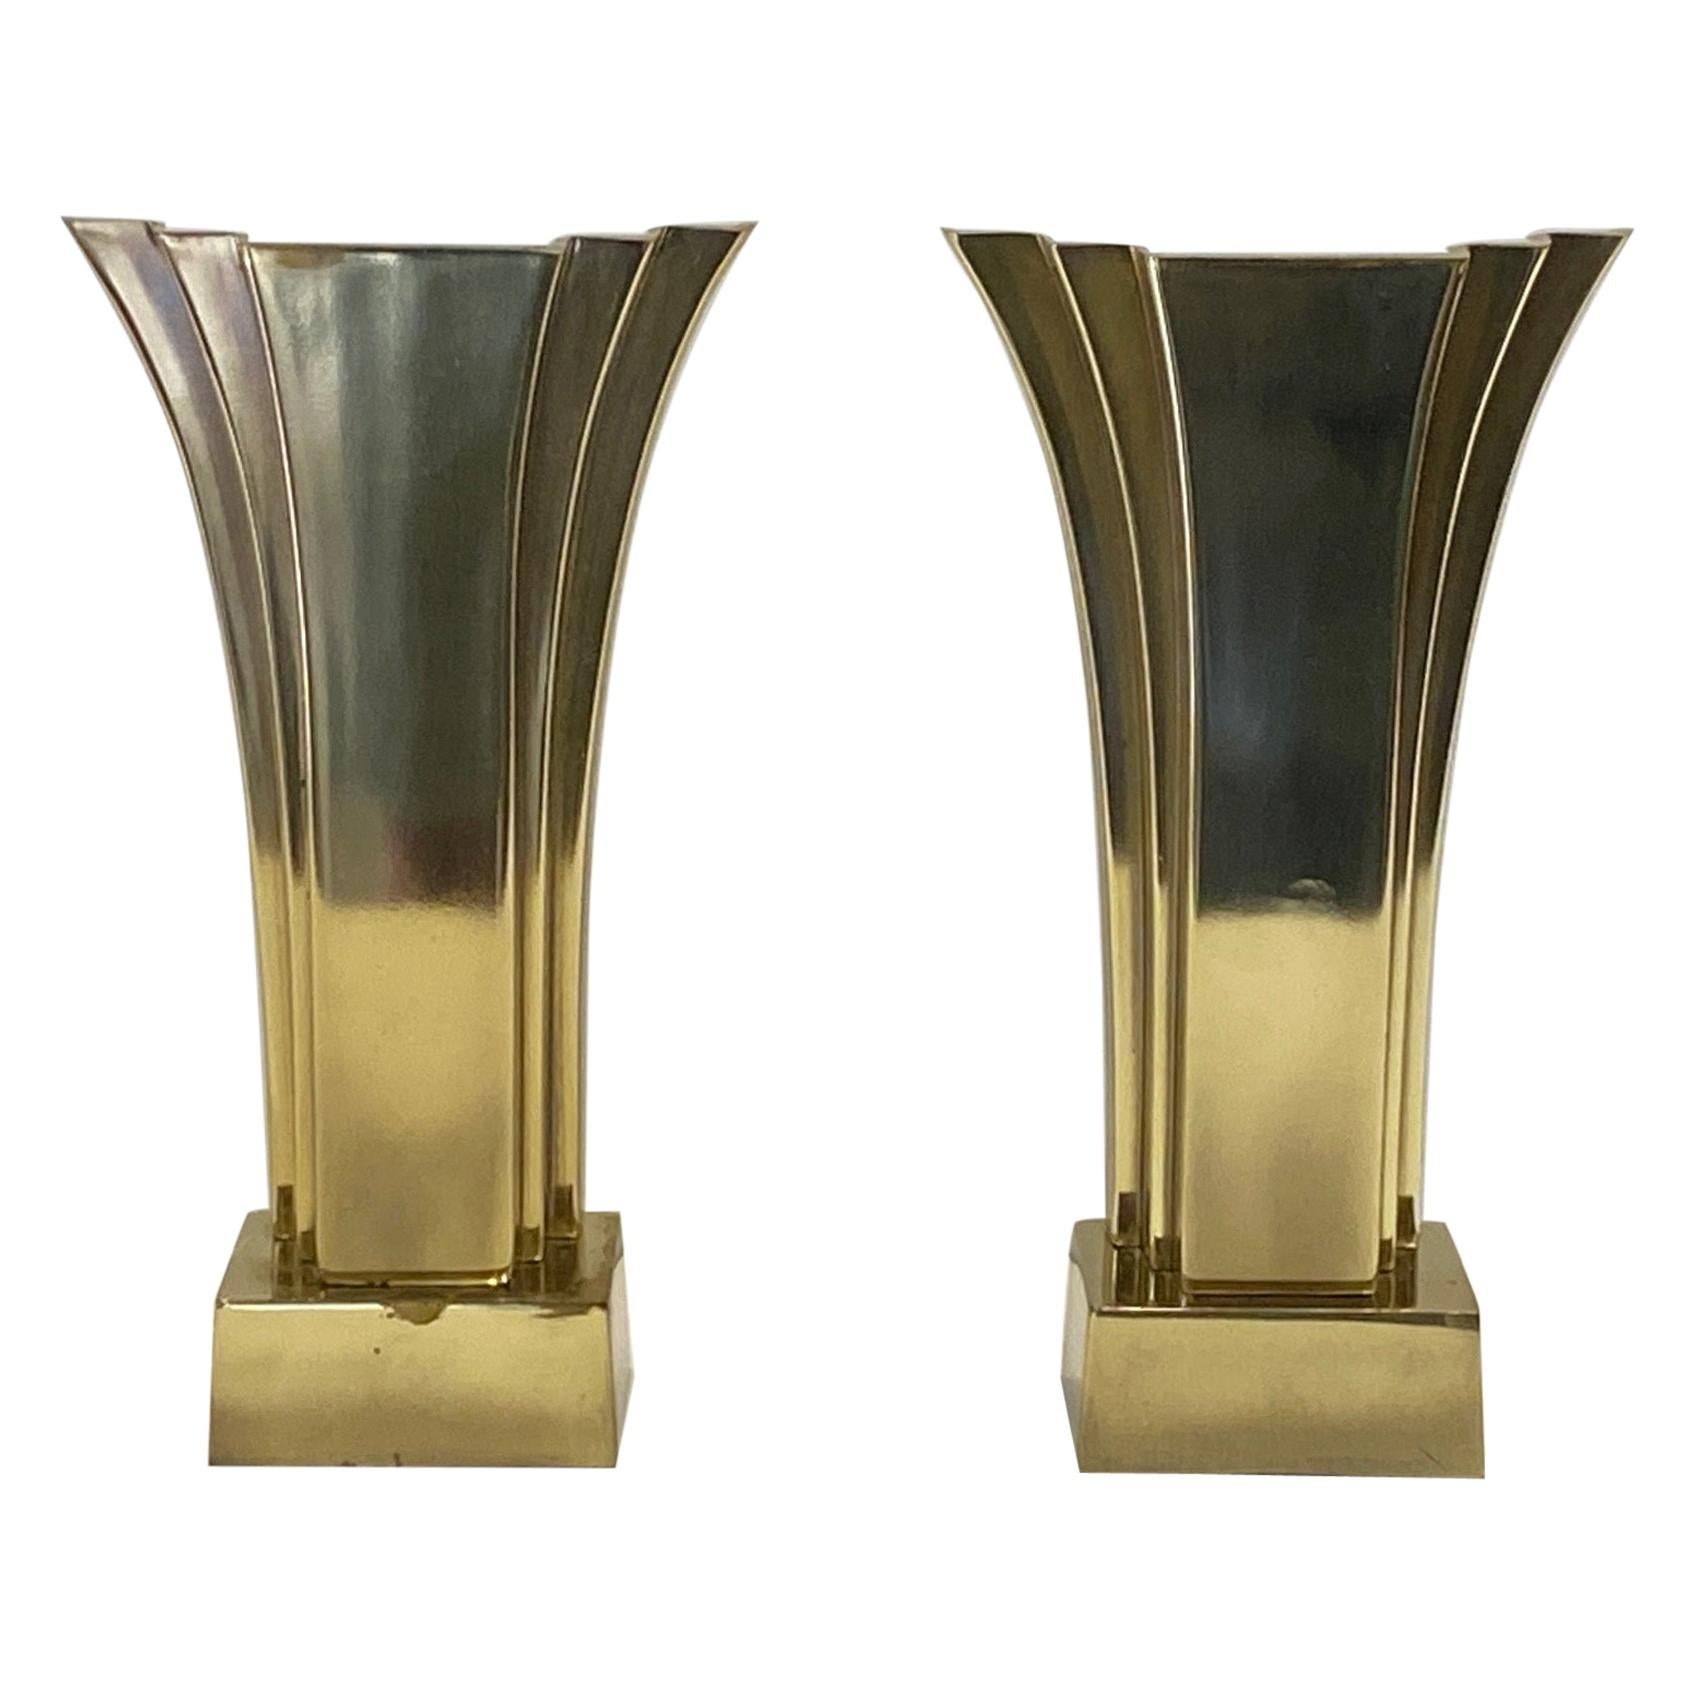 Super Stylish Pair of Mid Century Art Deco Brass Table Lamps by Stiffel